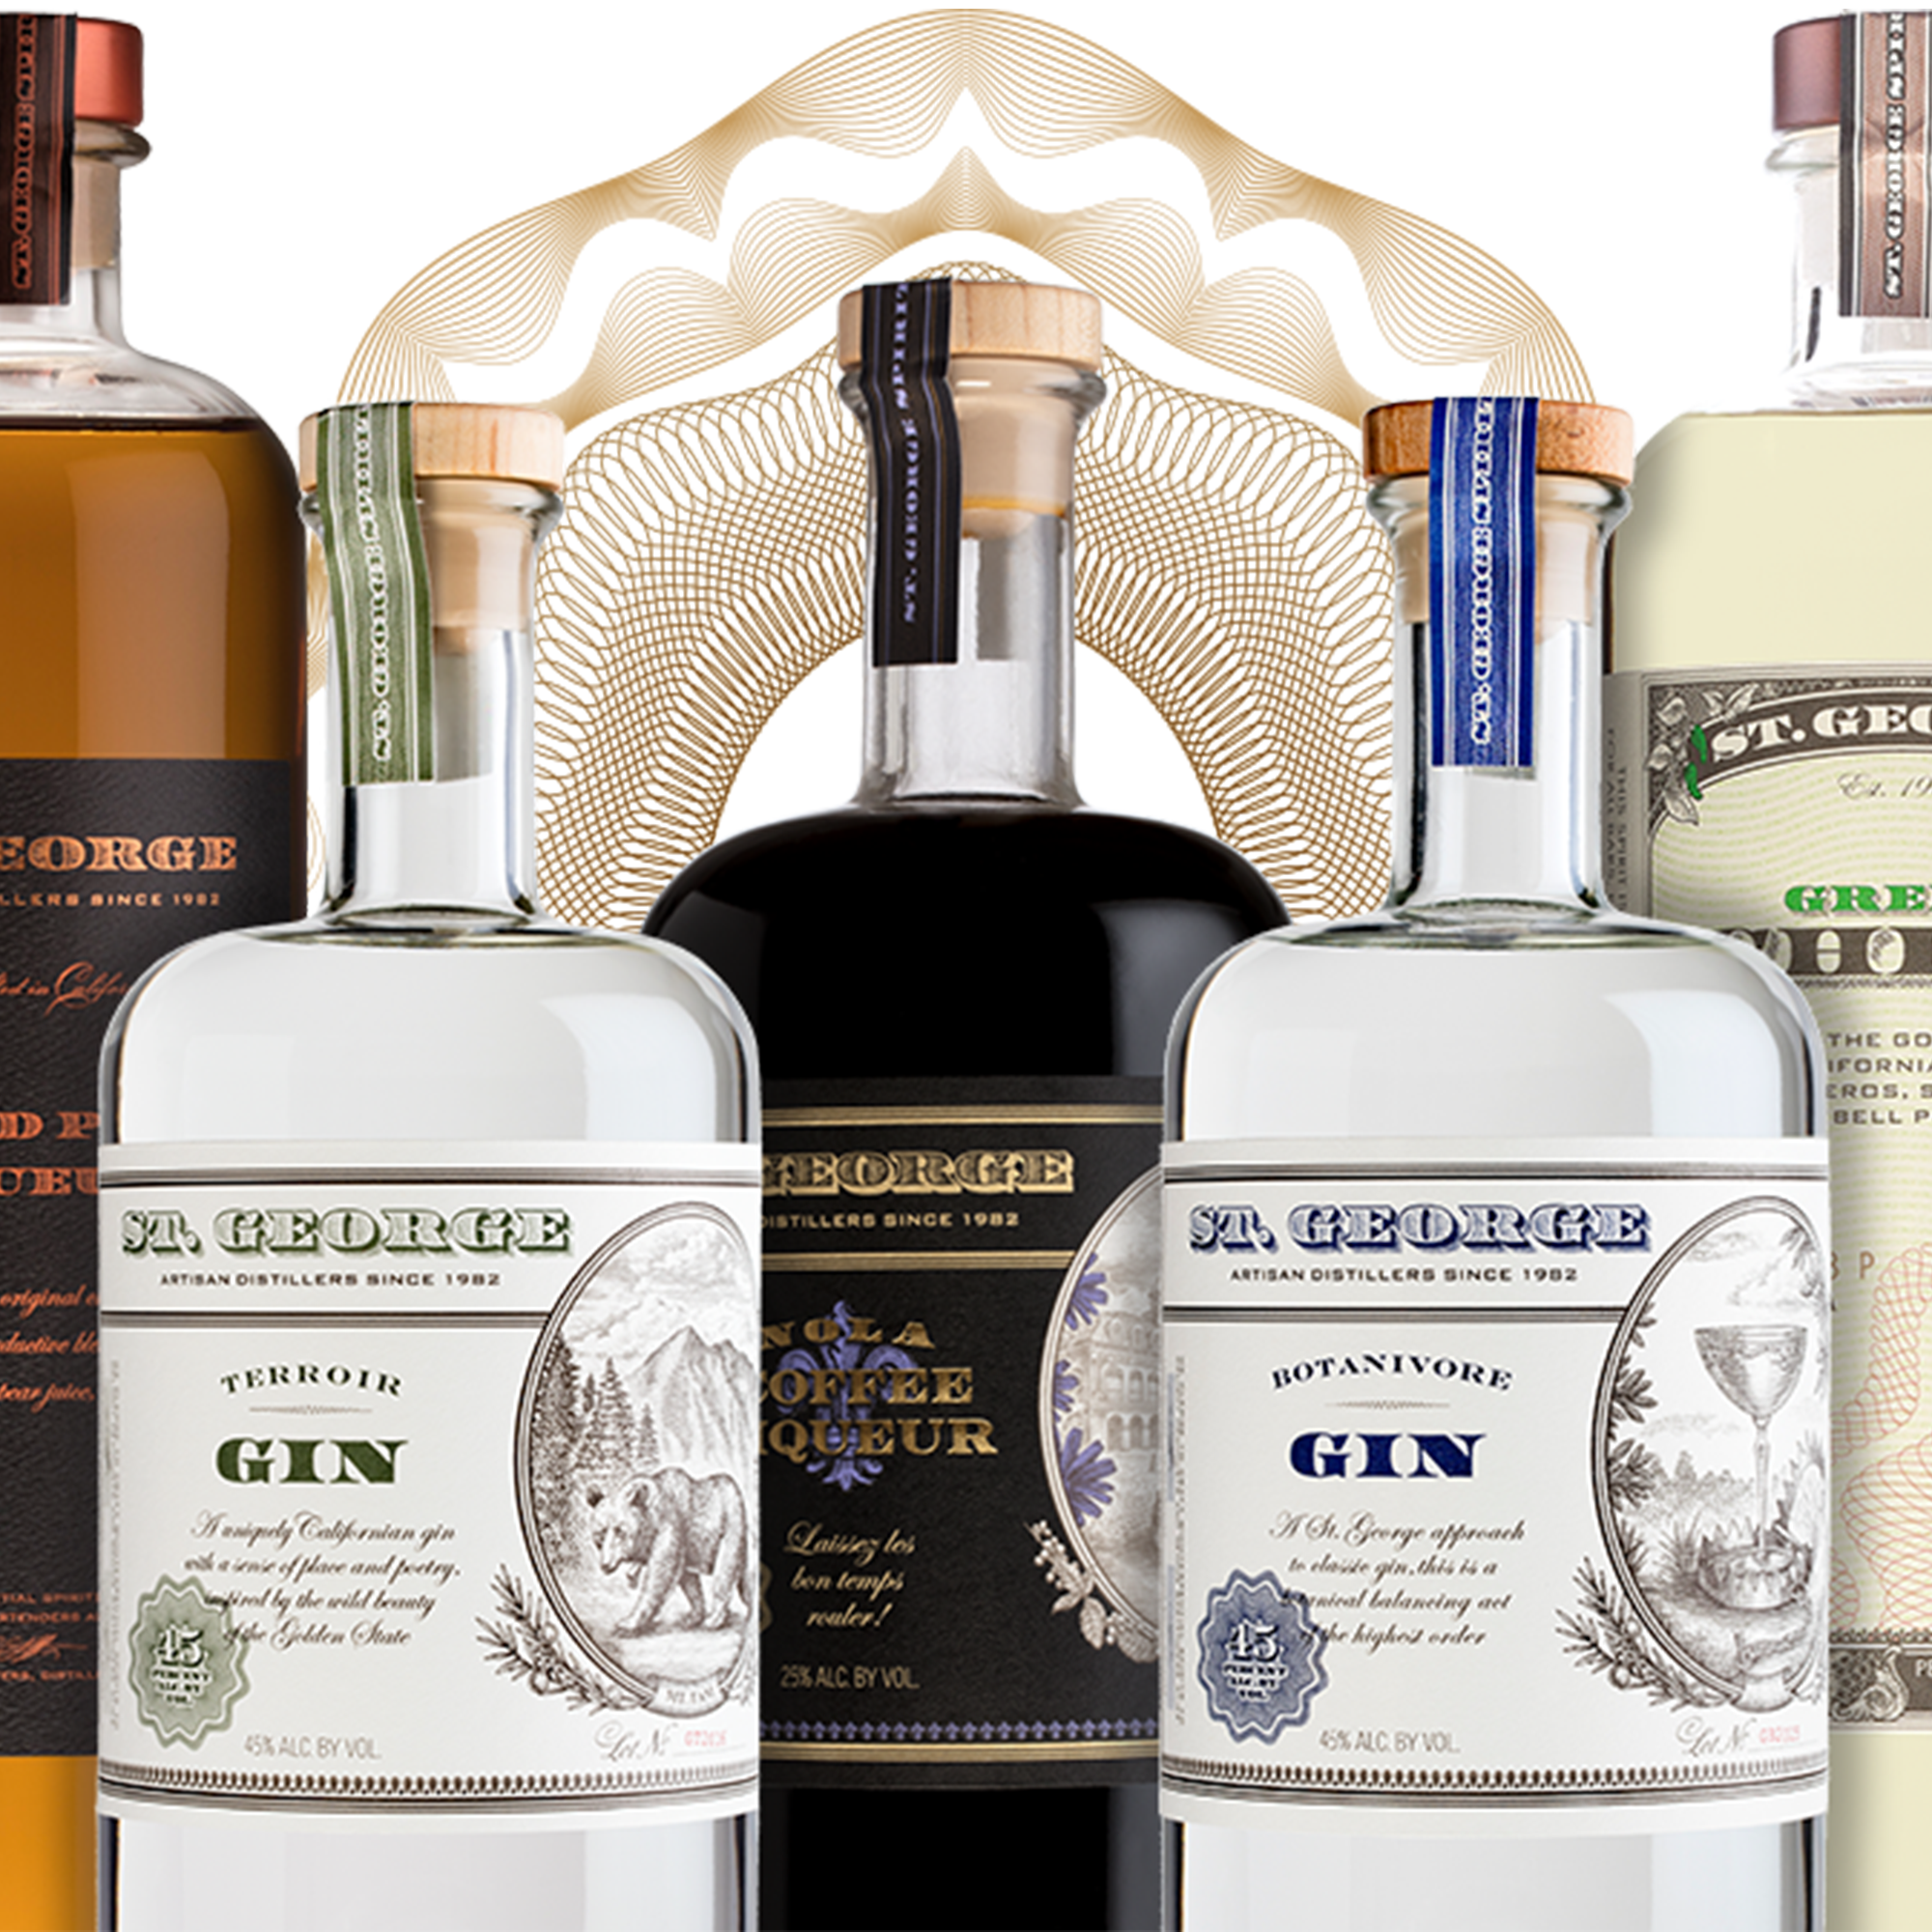 St. George Breaking and Entering American Whiskey